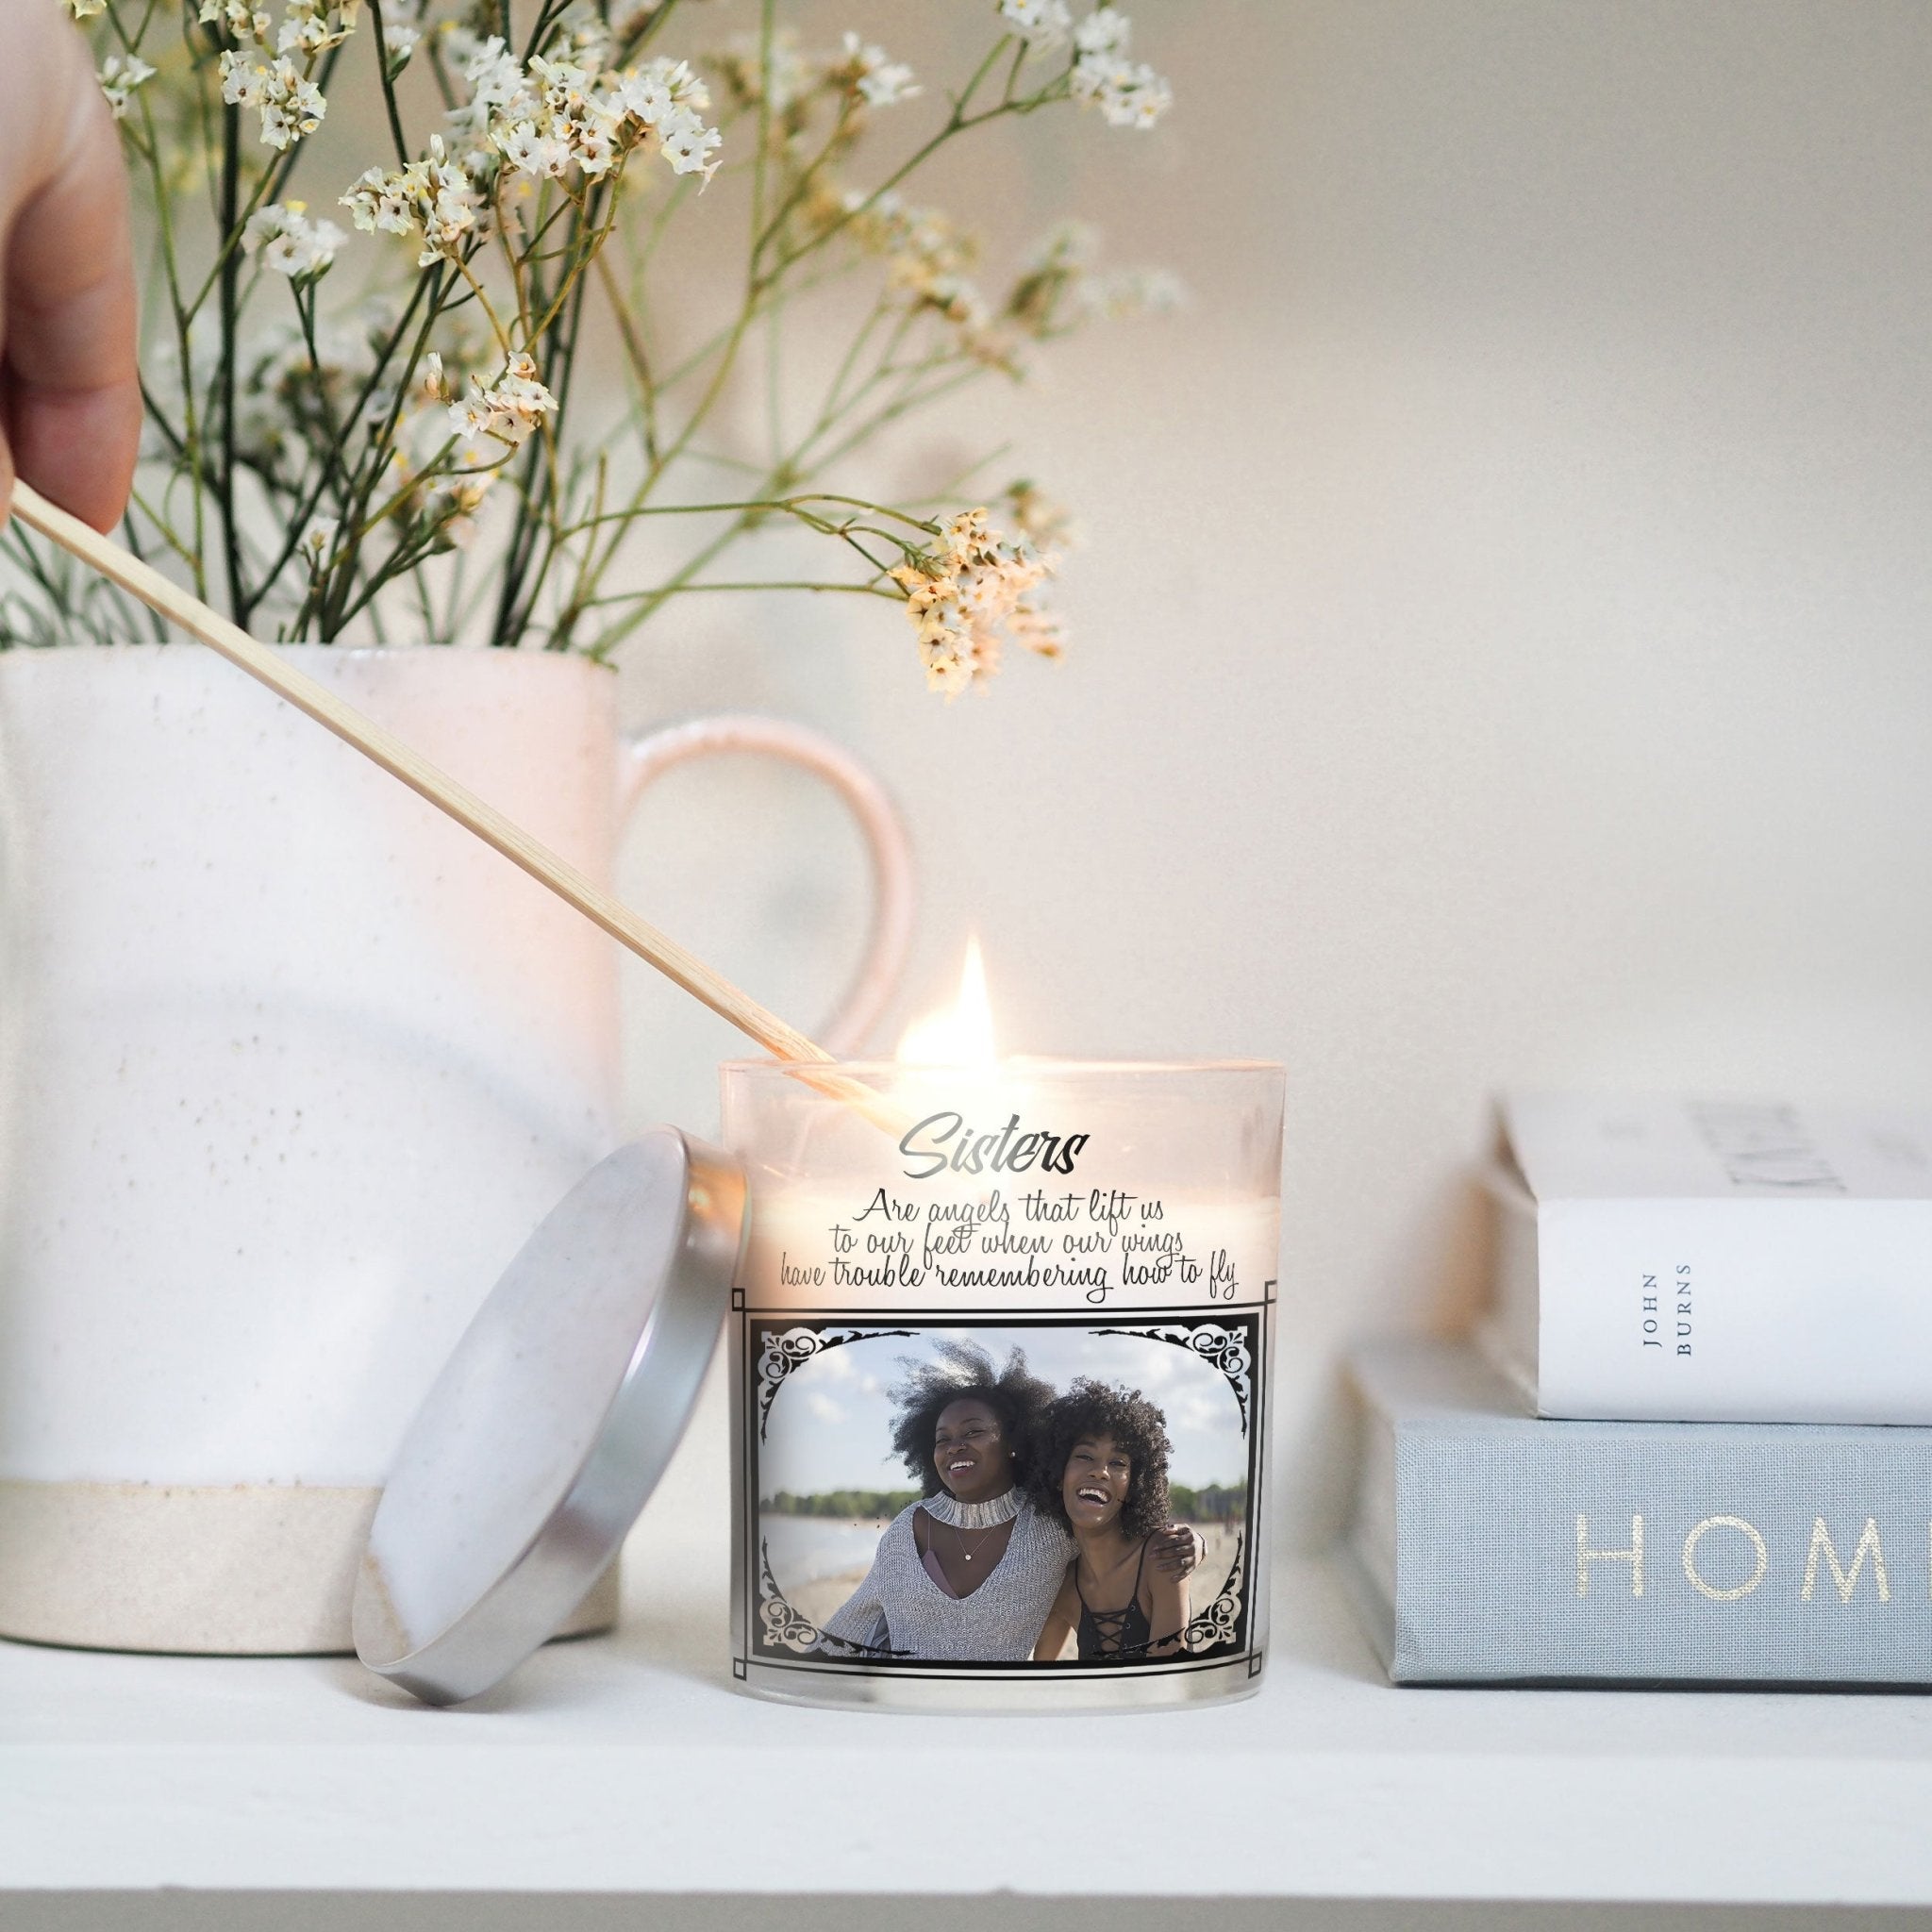 Sisters Quotes Customized Photo Candle Holder | Sis Quotation Gift Ideas | Personalized Votive Glass with Picture | Home Decor Present Candleholder - Unique Prints